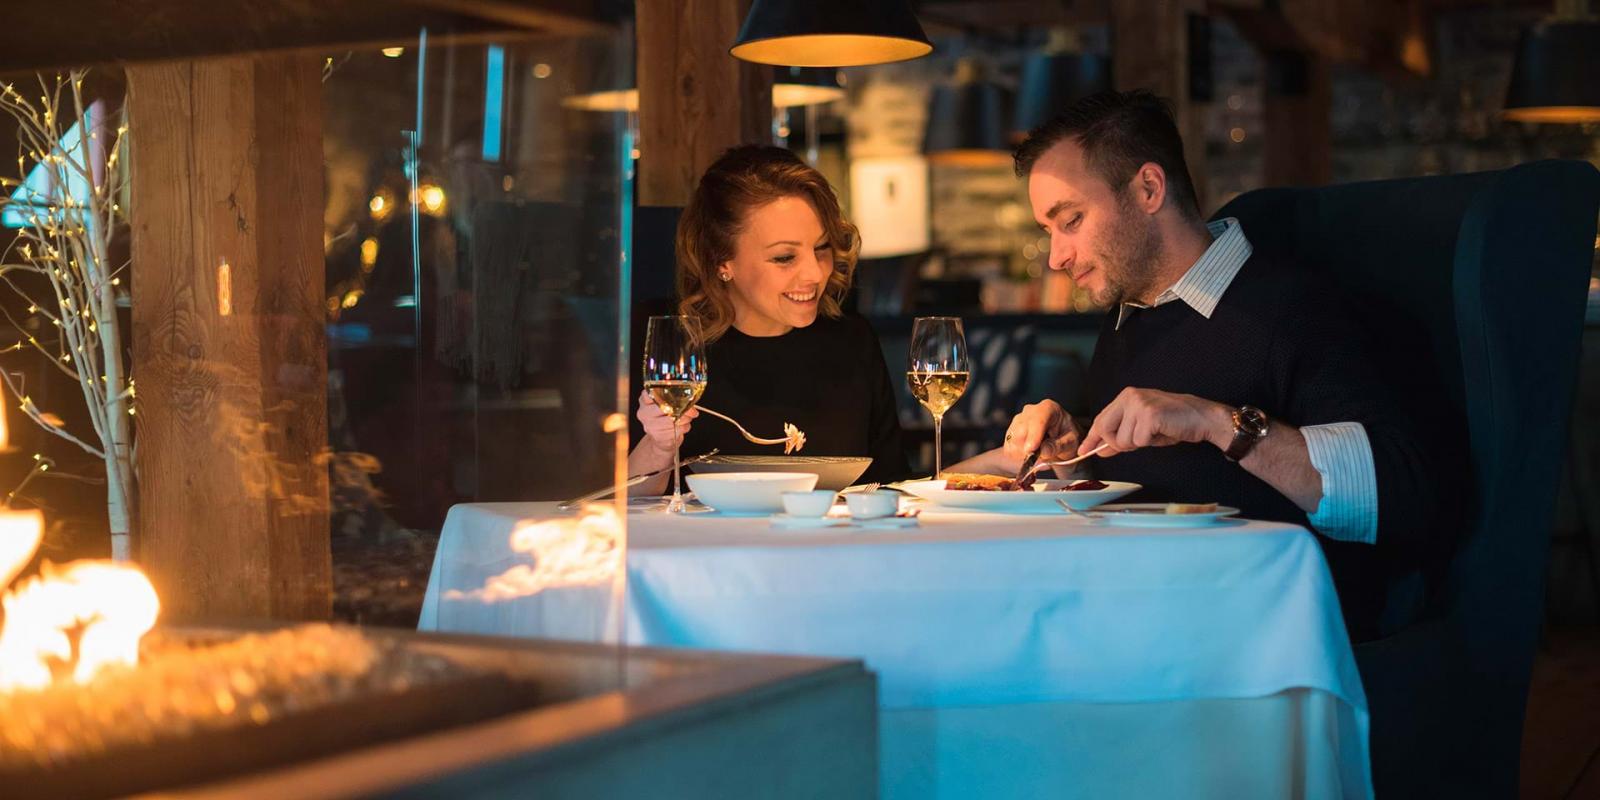  A couple enjoys the gastronomy and the romantic atmosphere at the Auberge Saint-Antoine restaurant, Chez Muffy.